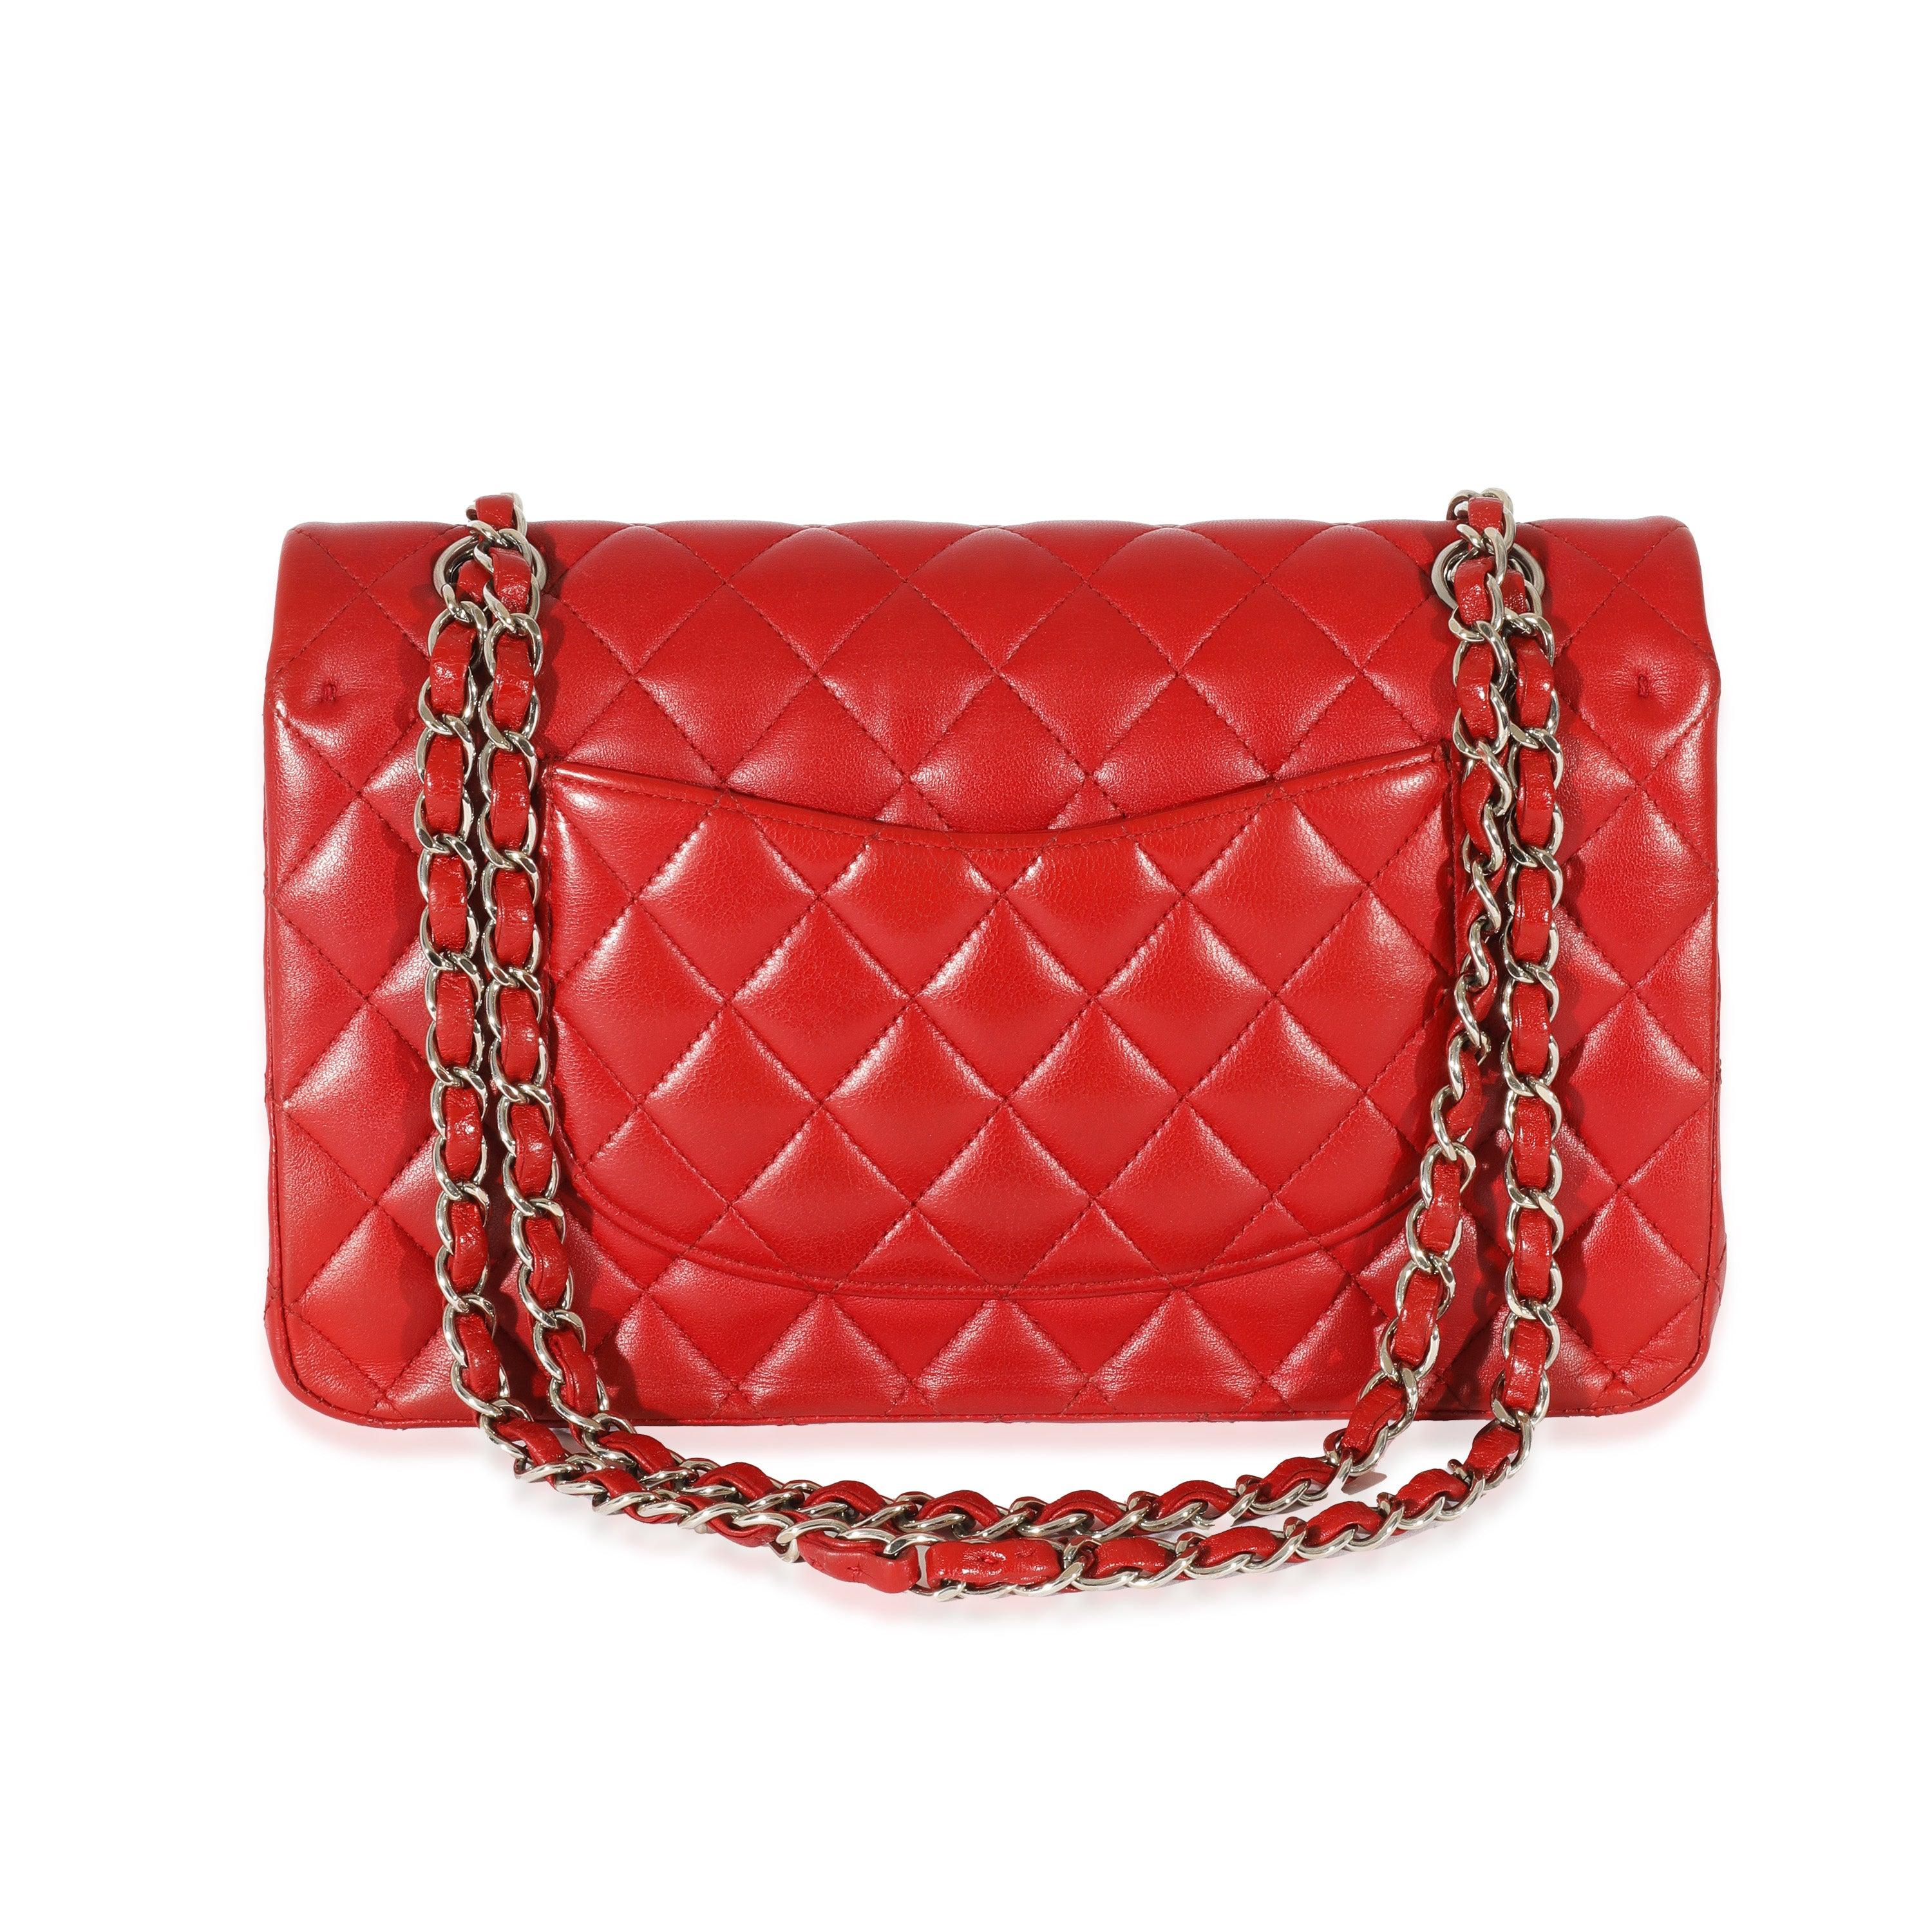 Chanel Red Quilted Lambskin Medium Classic Double Flap Bag In Good Condition For Sale In London, GB